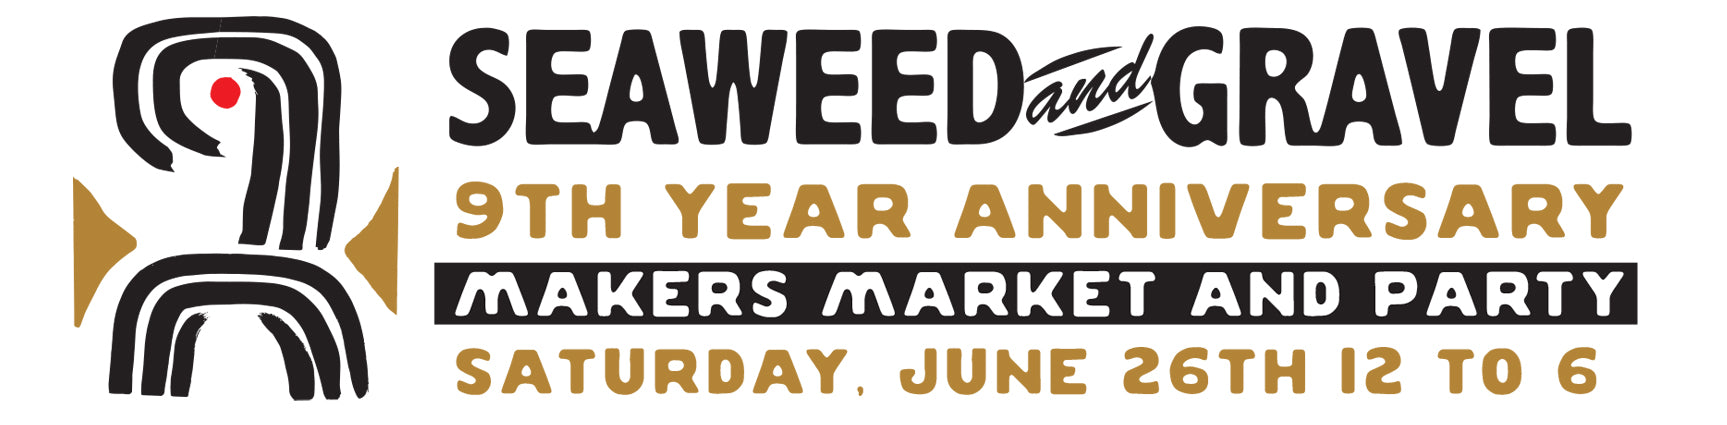 Makers Market and 9th Year Anniversary